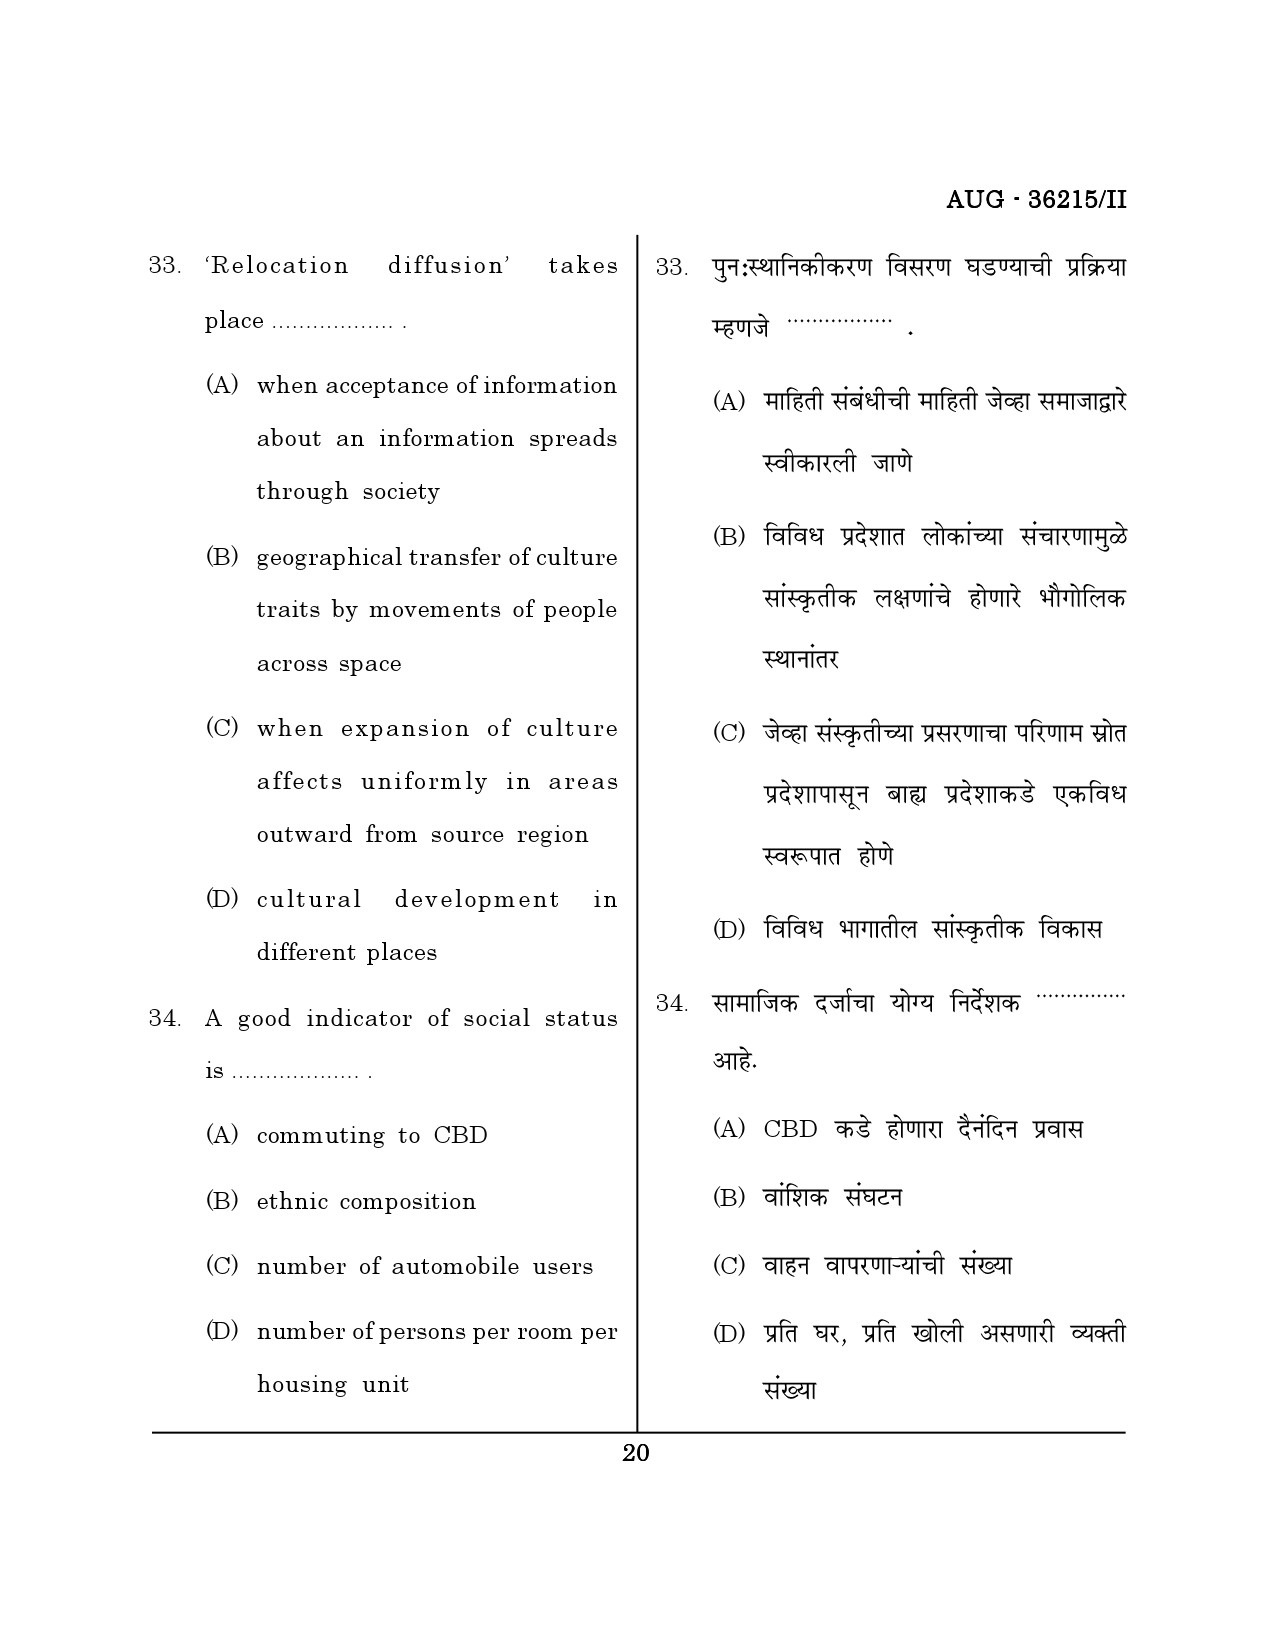 Maharashtra SET Geography Question Paper II August 2015 19